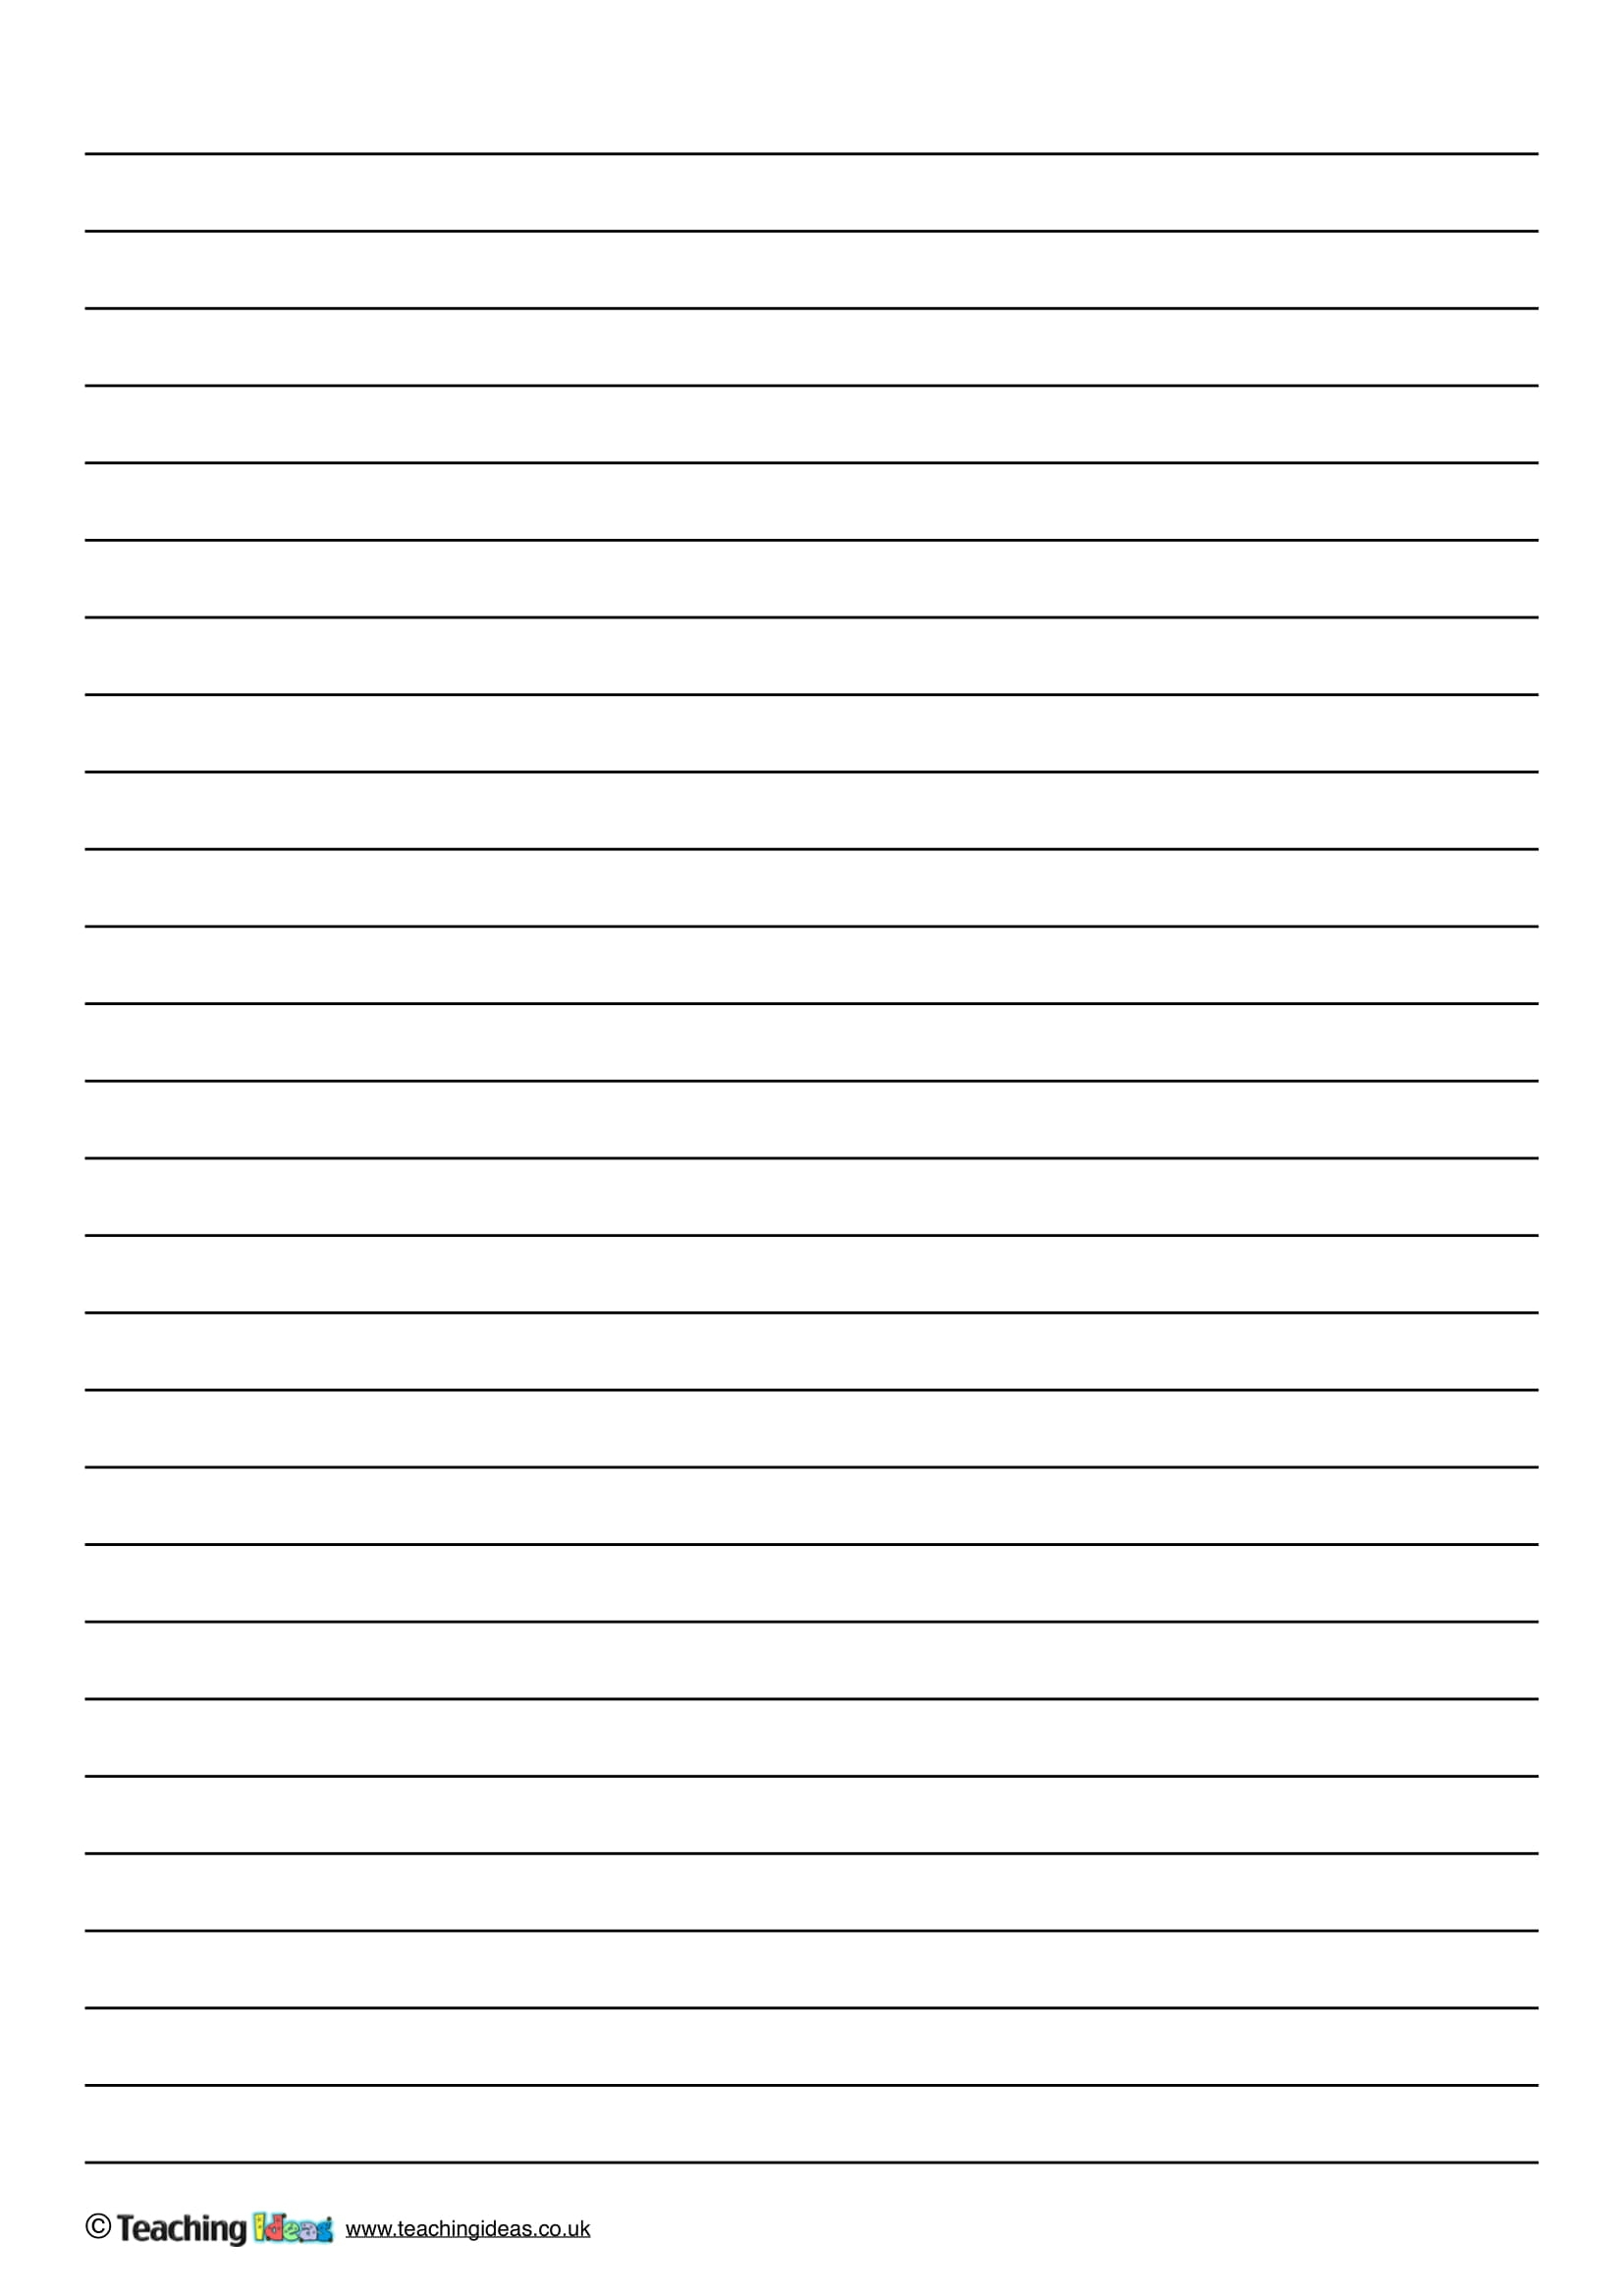 11+ Lined Paper Templates - Pdf | Free & Premium Templates In Ruled Paper Word Template